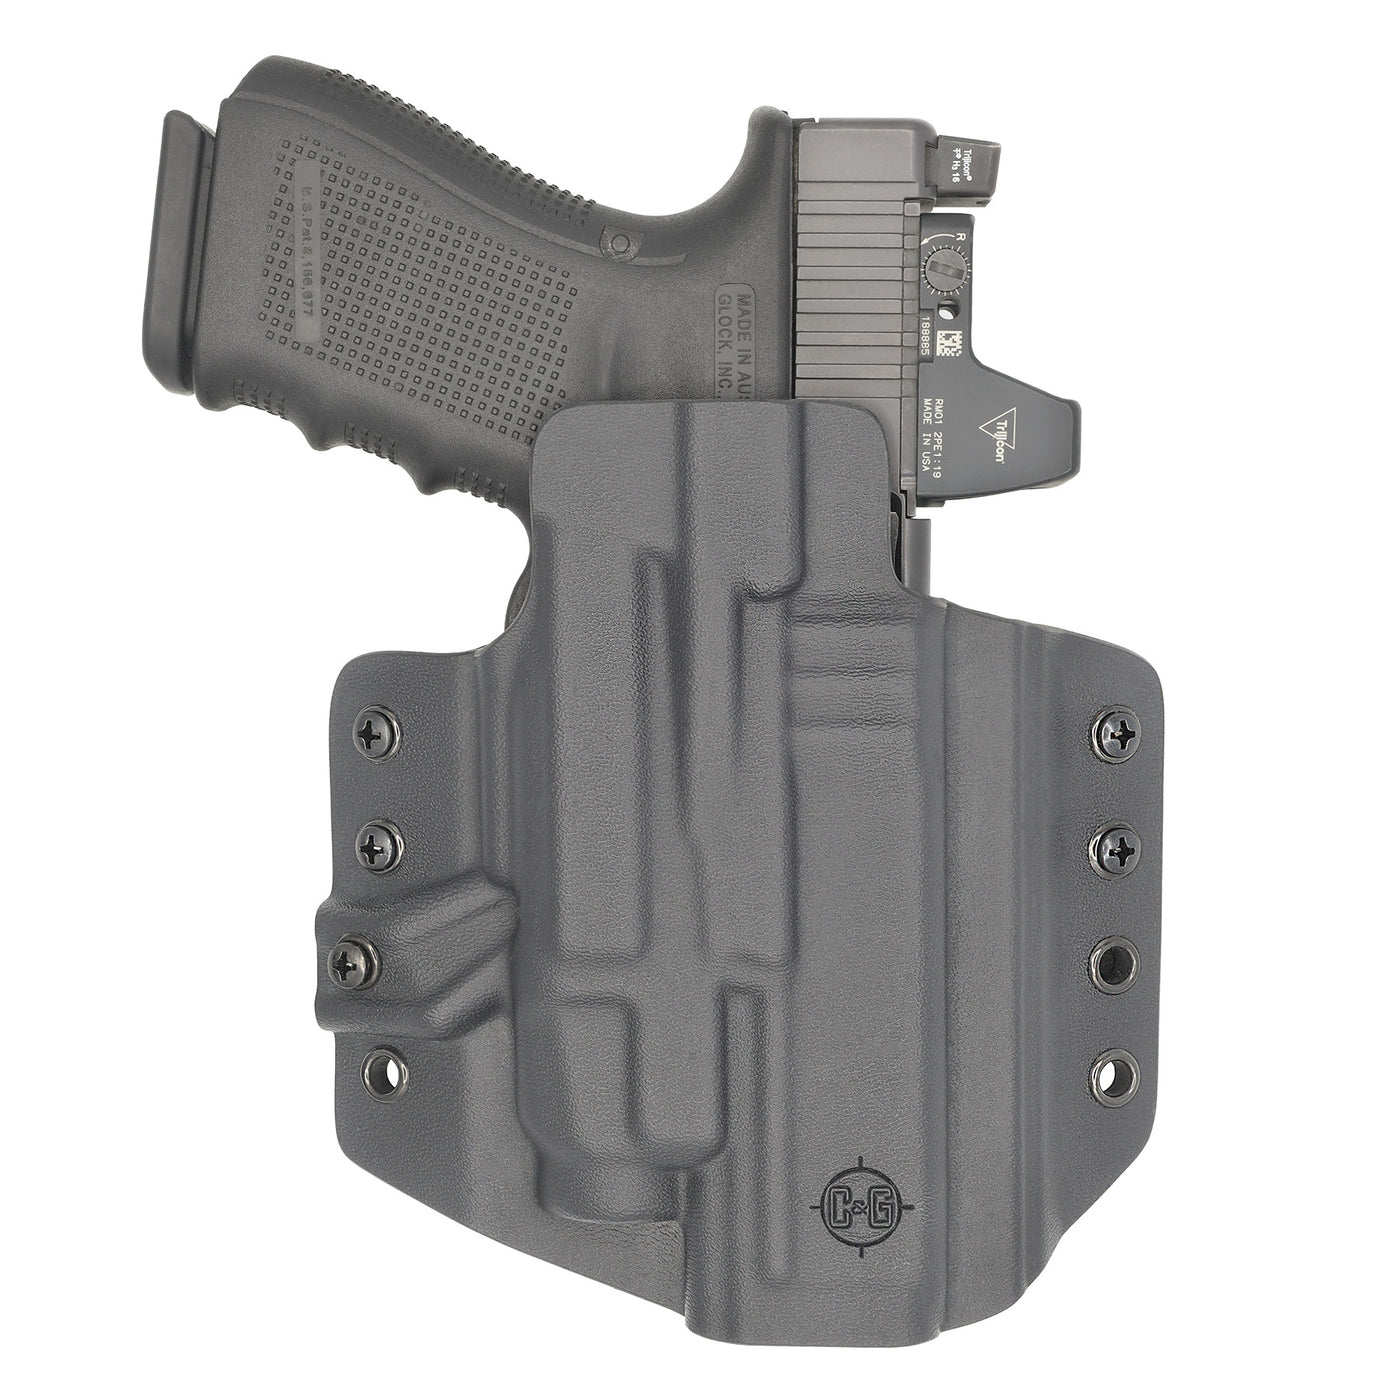 C&G Holsters quickship OWB tactical OZ9/c streamlight tlr7/a in holstered position